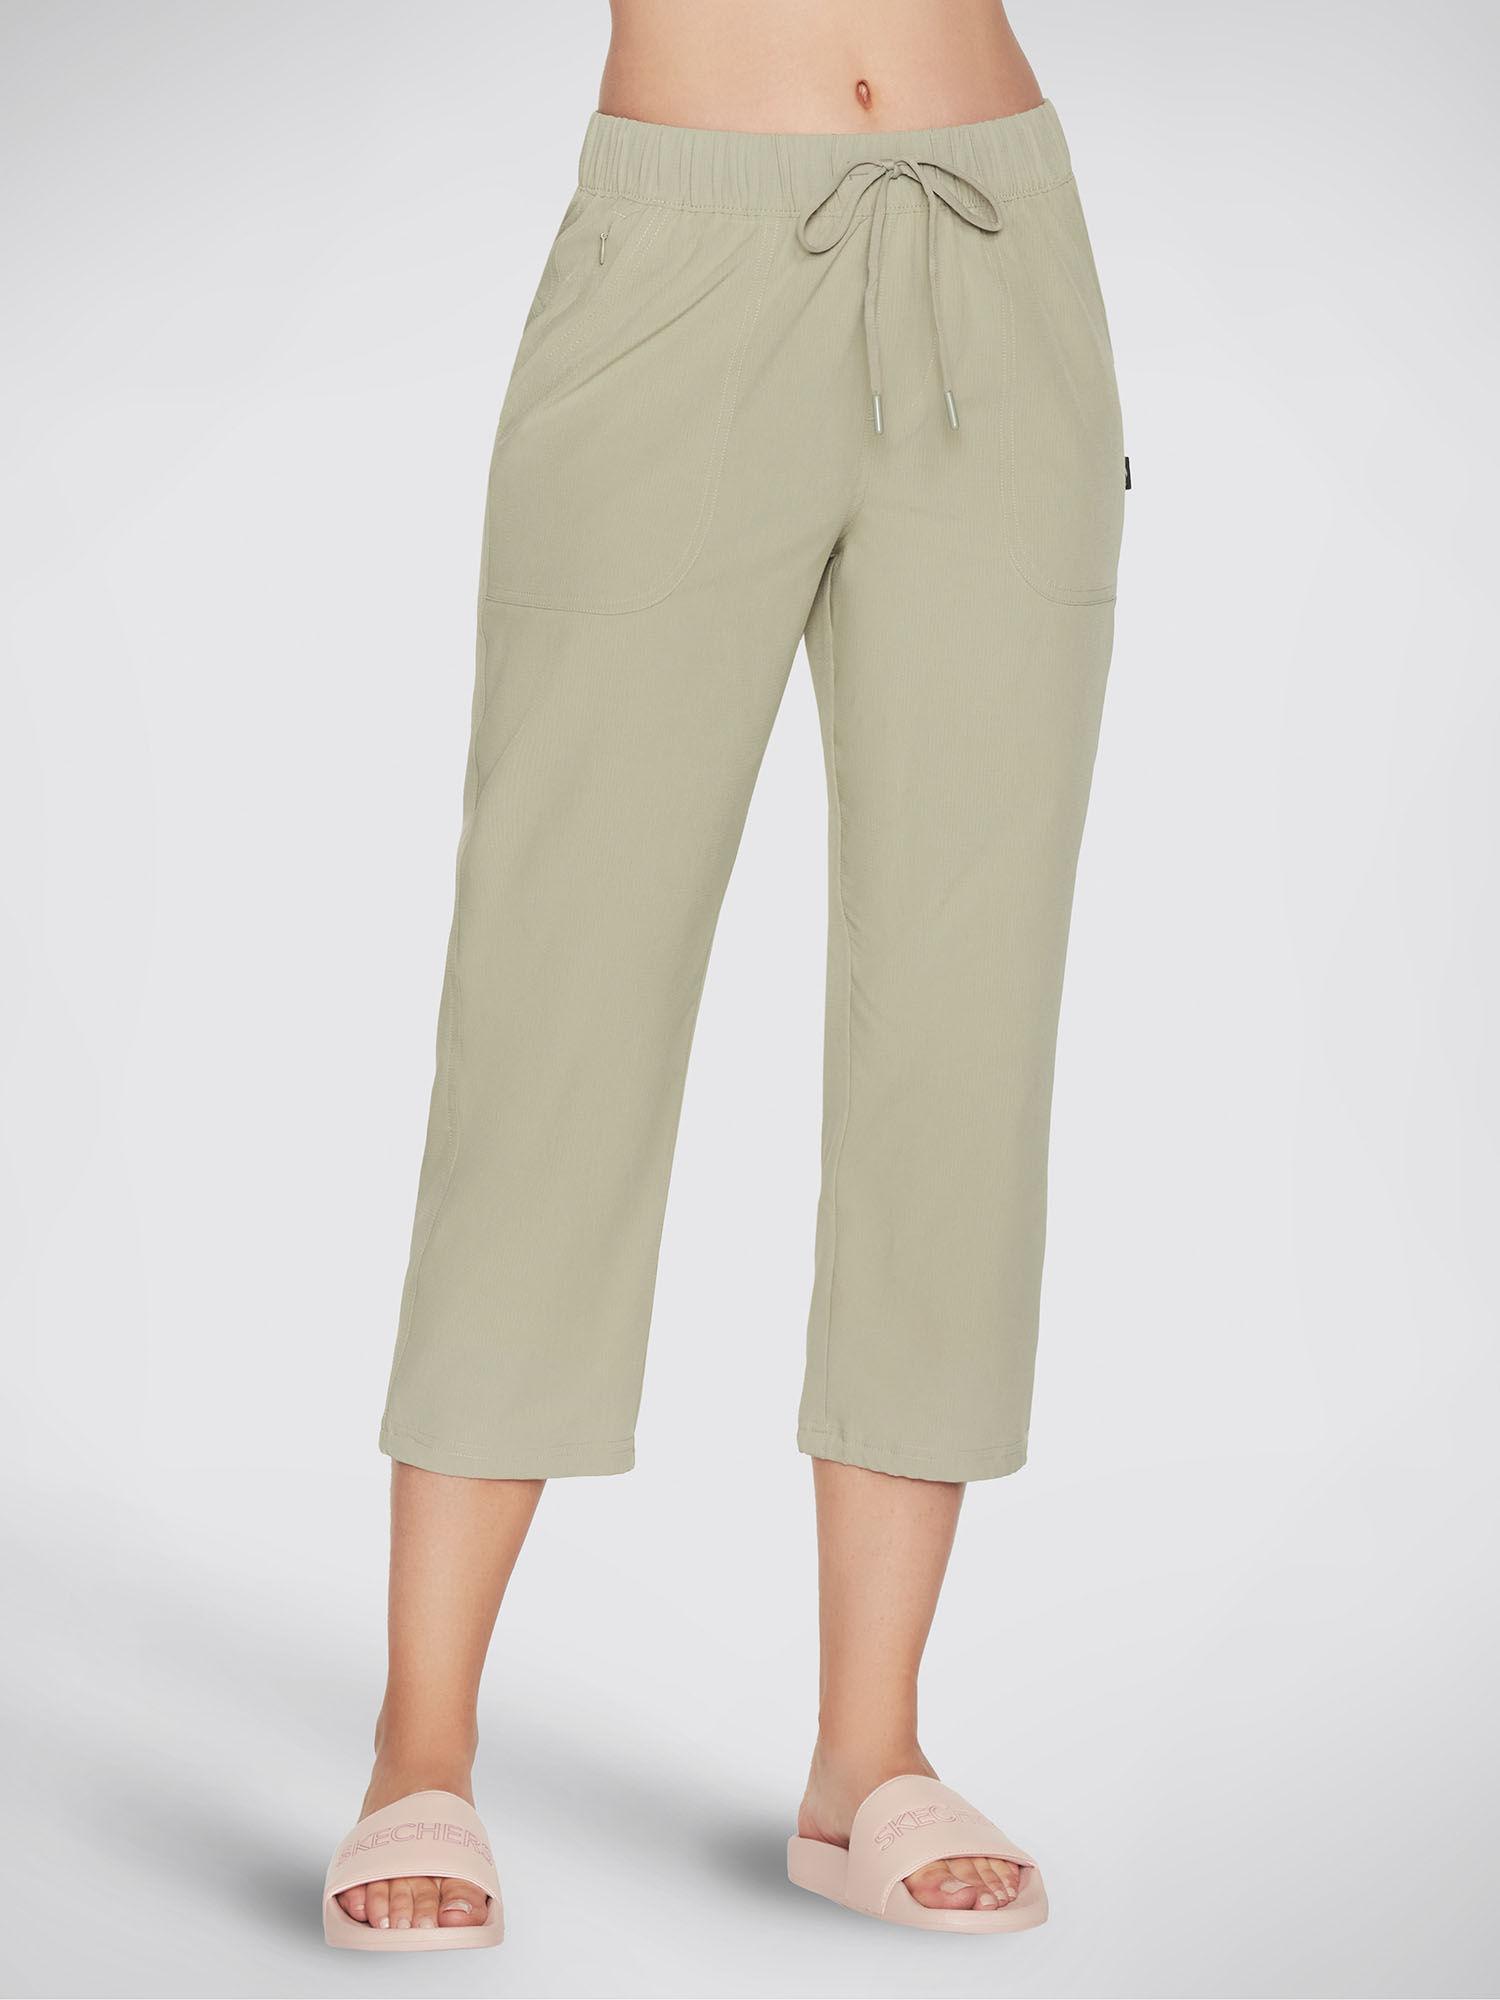 Incline Midcalf Pant